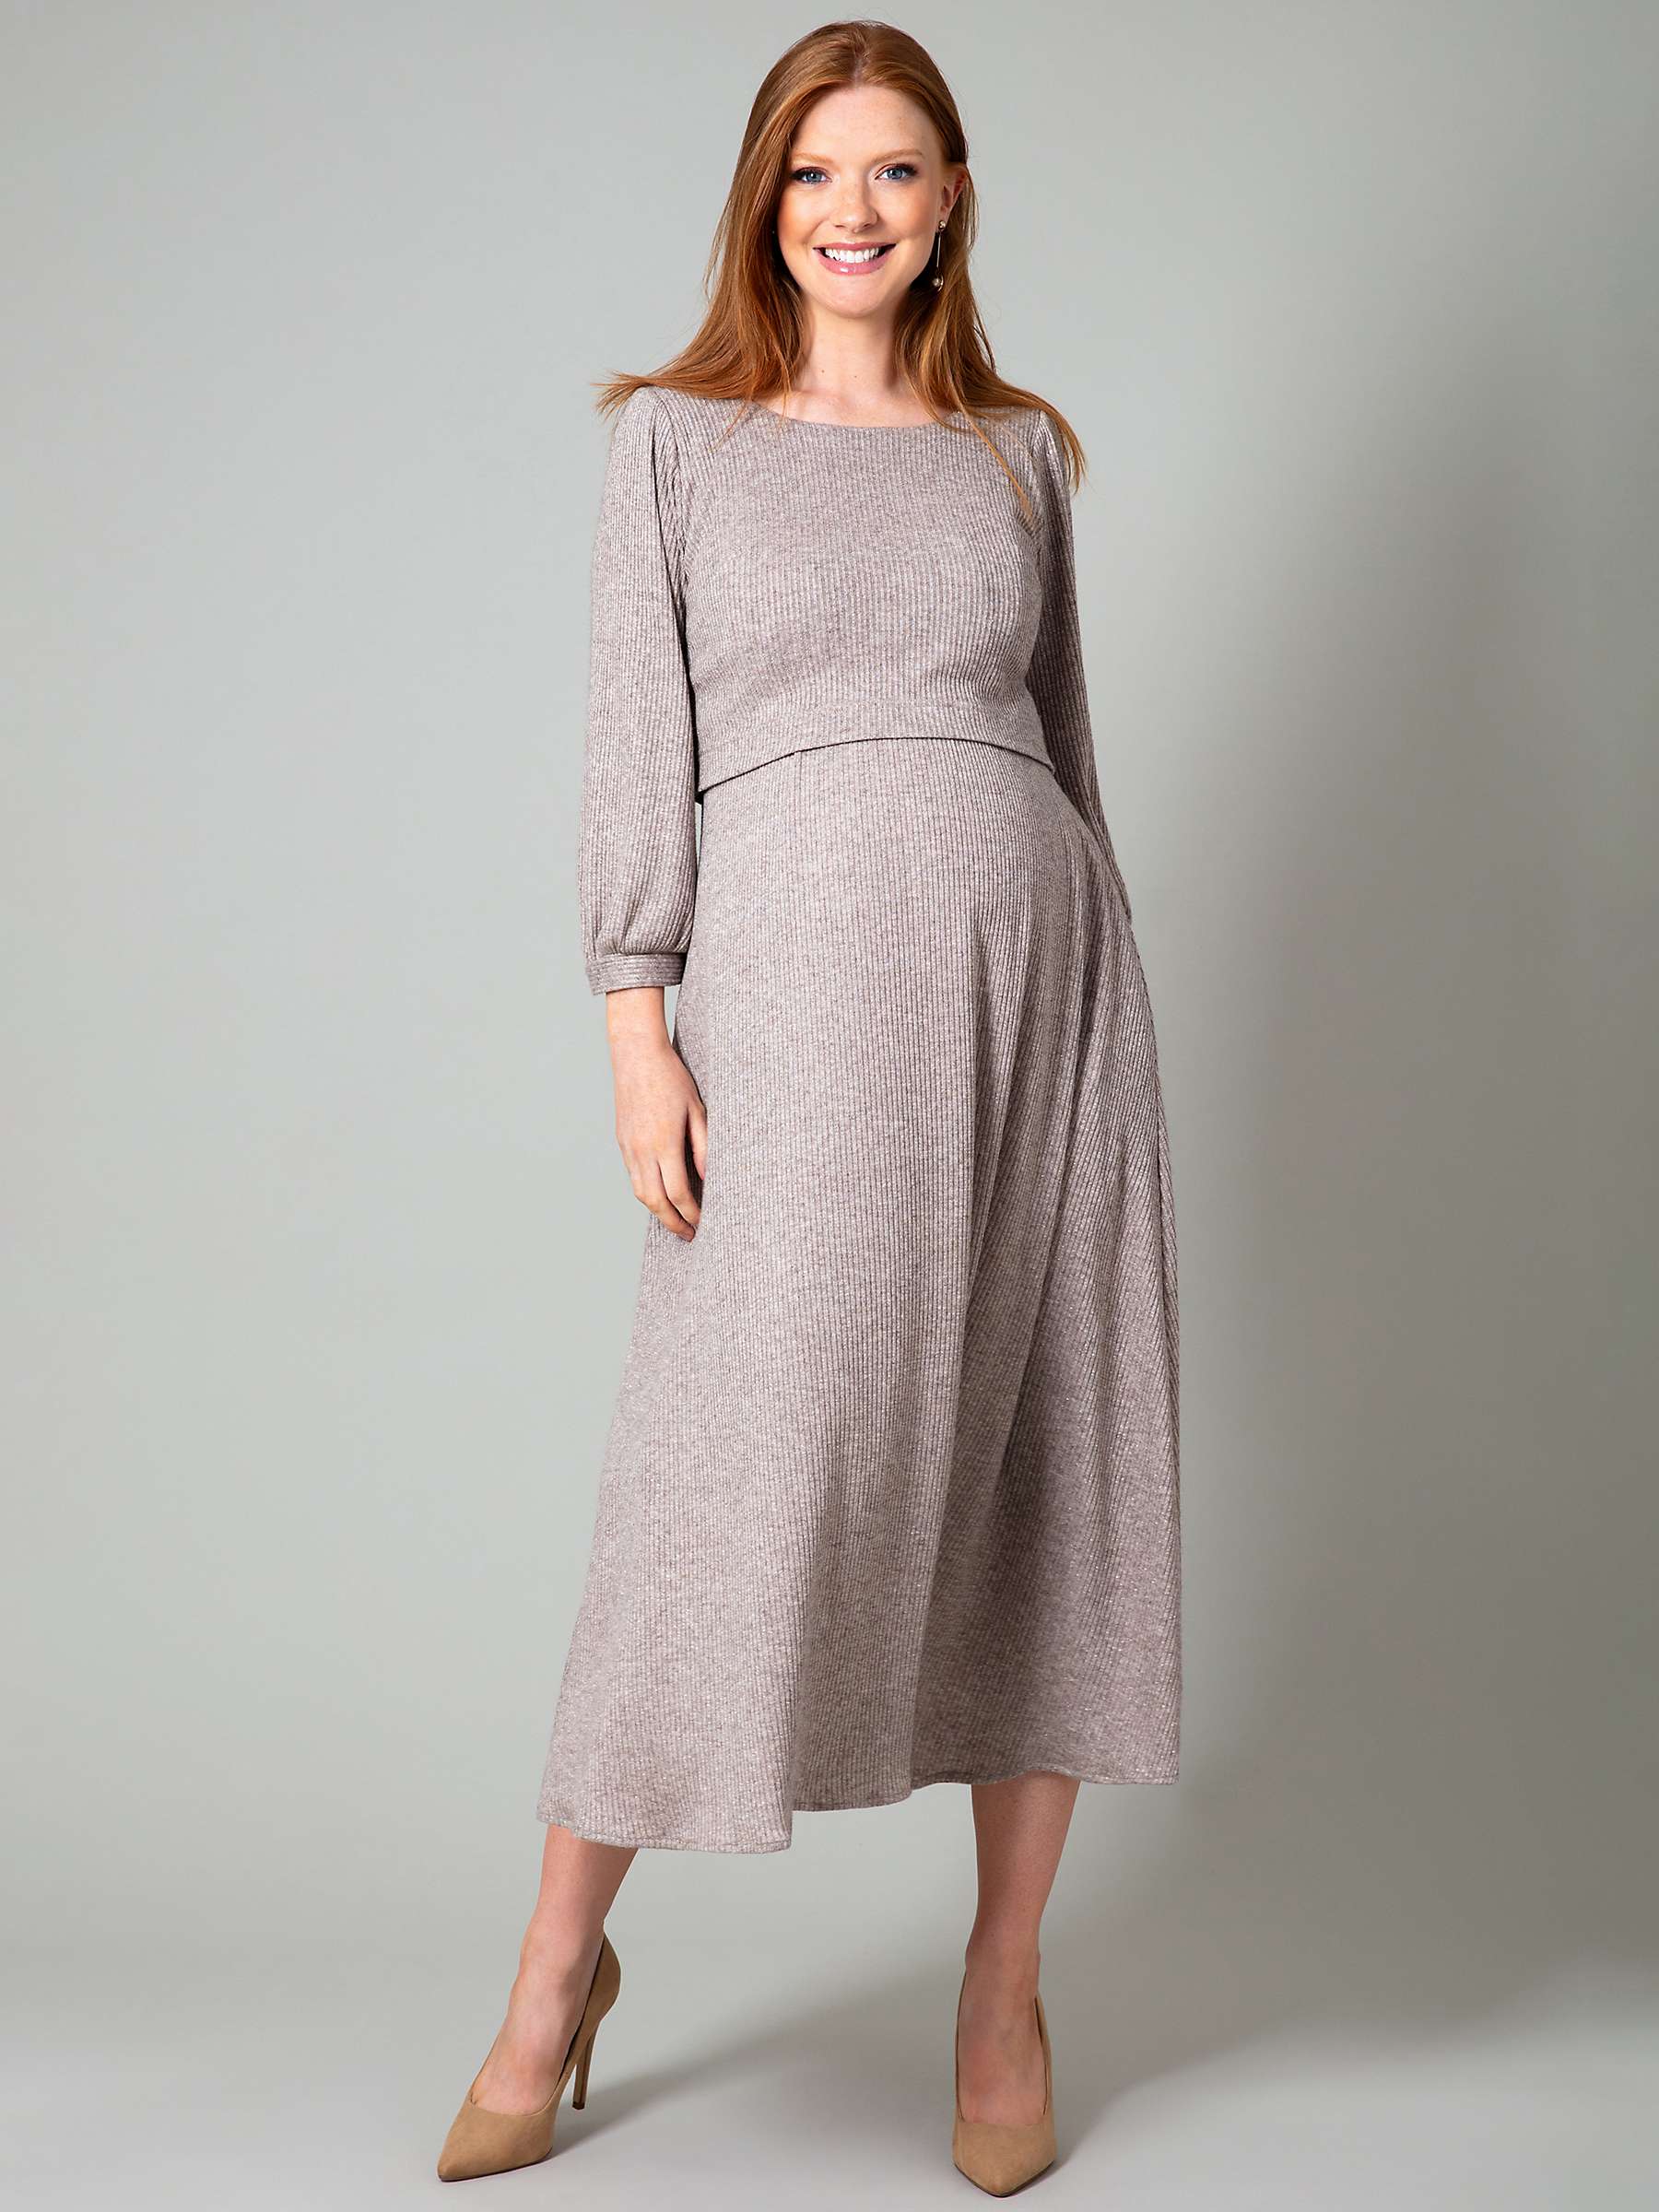 Buy Tiffany Rose Vivian Maternity Ribbed Jersey Dress, Sparkle Chocolate Online at johnlewis.com